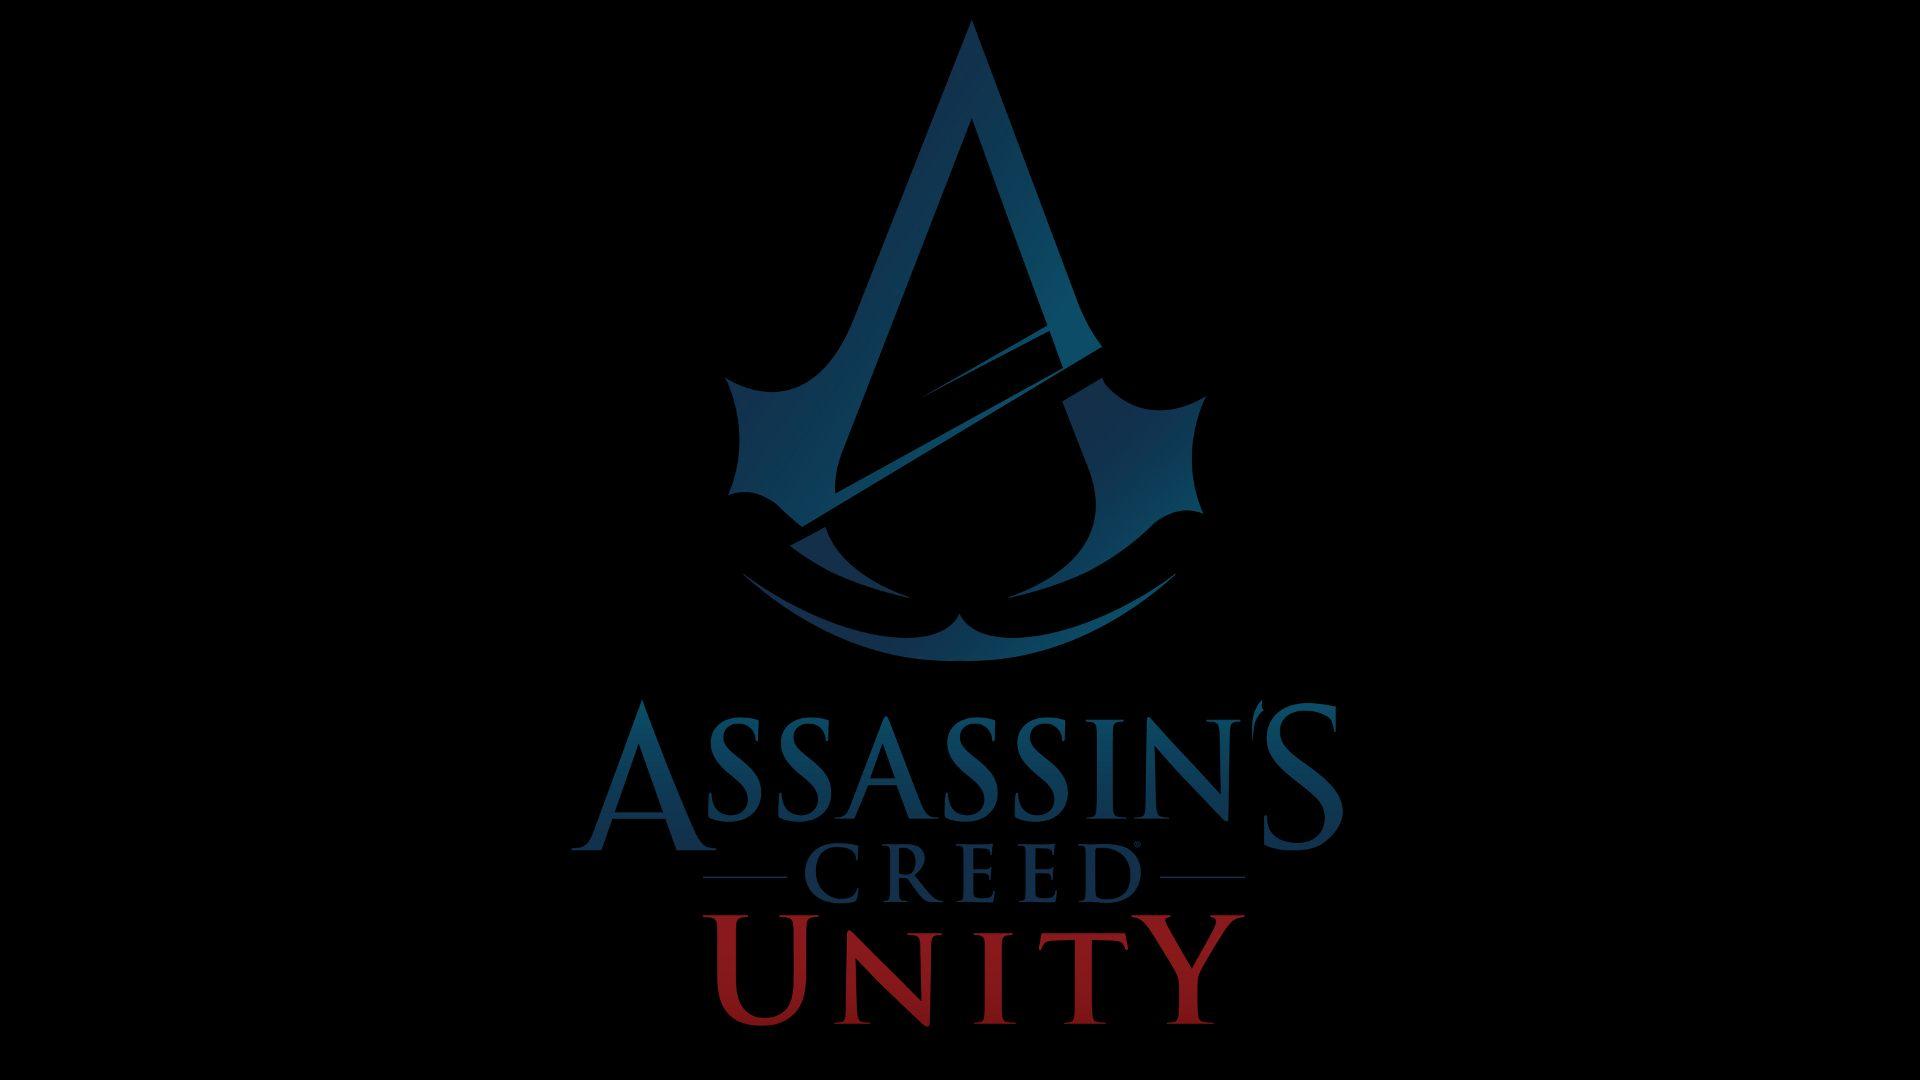 Asassin's Creed Unity confirmed by Ubisoft, the guillotine drops